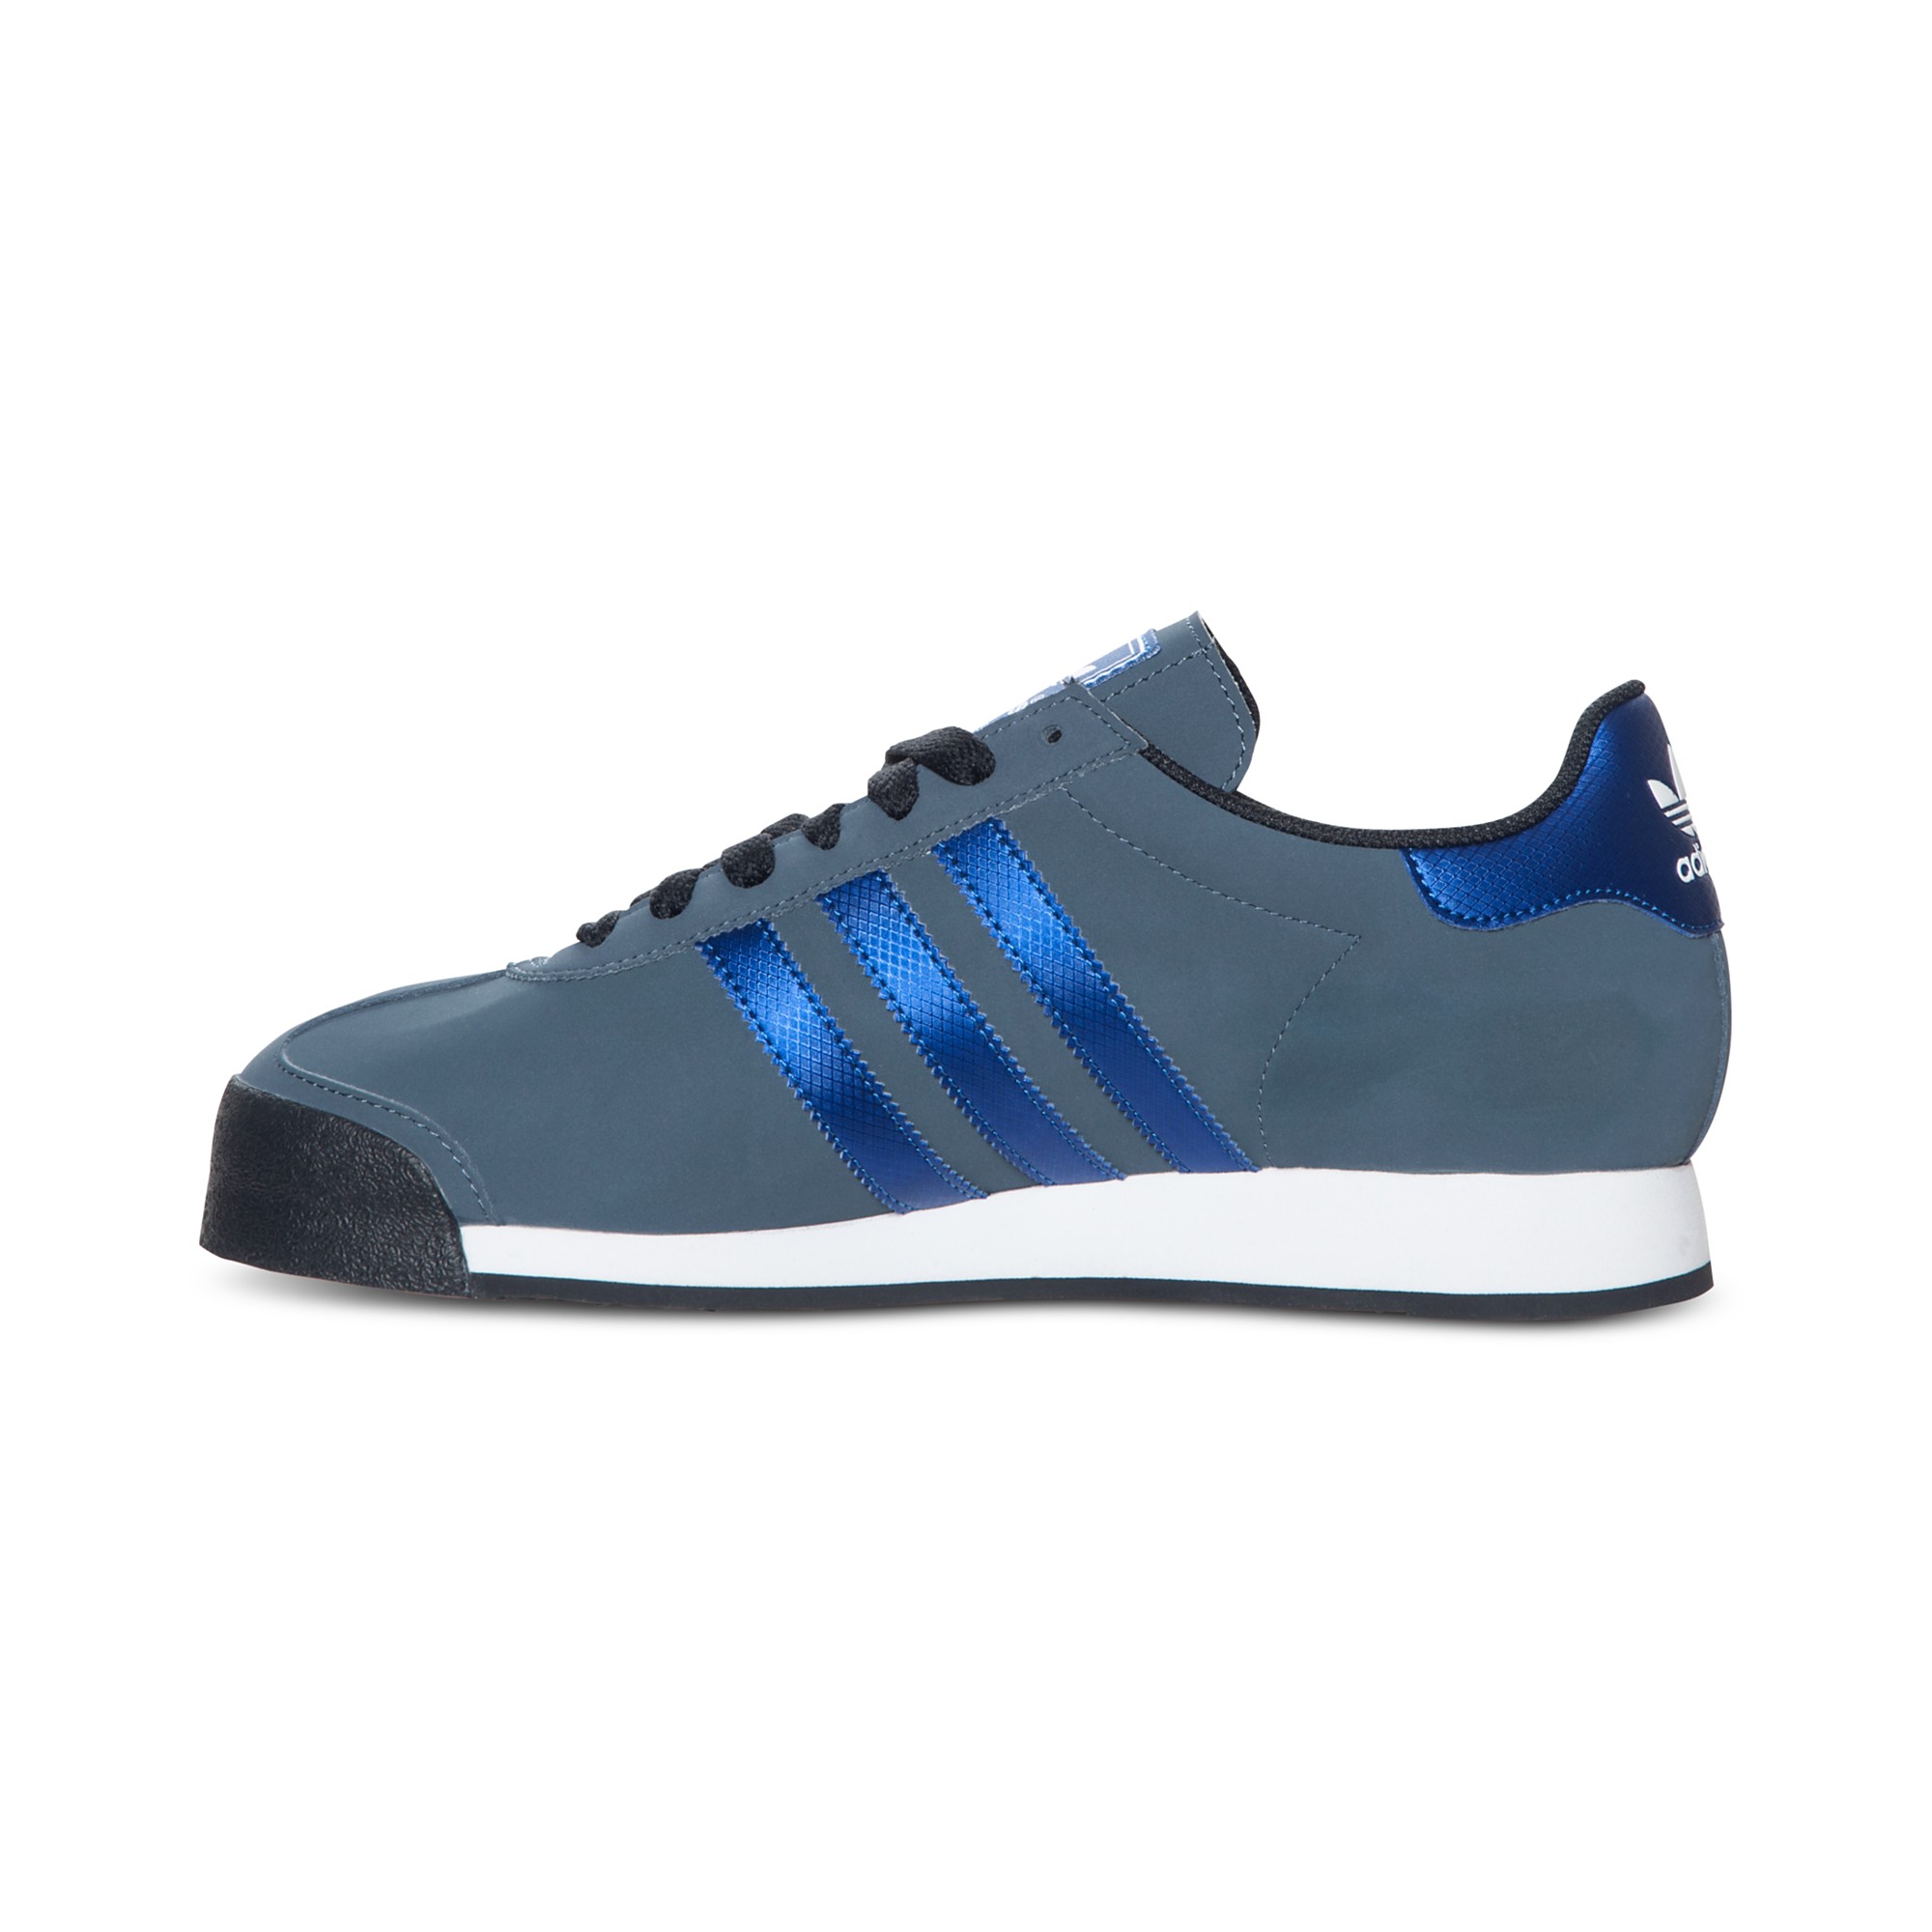 adidas Samoa Sneakers in Blue for Men - Lyst